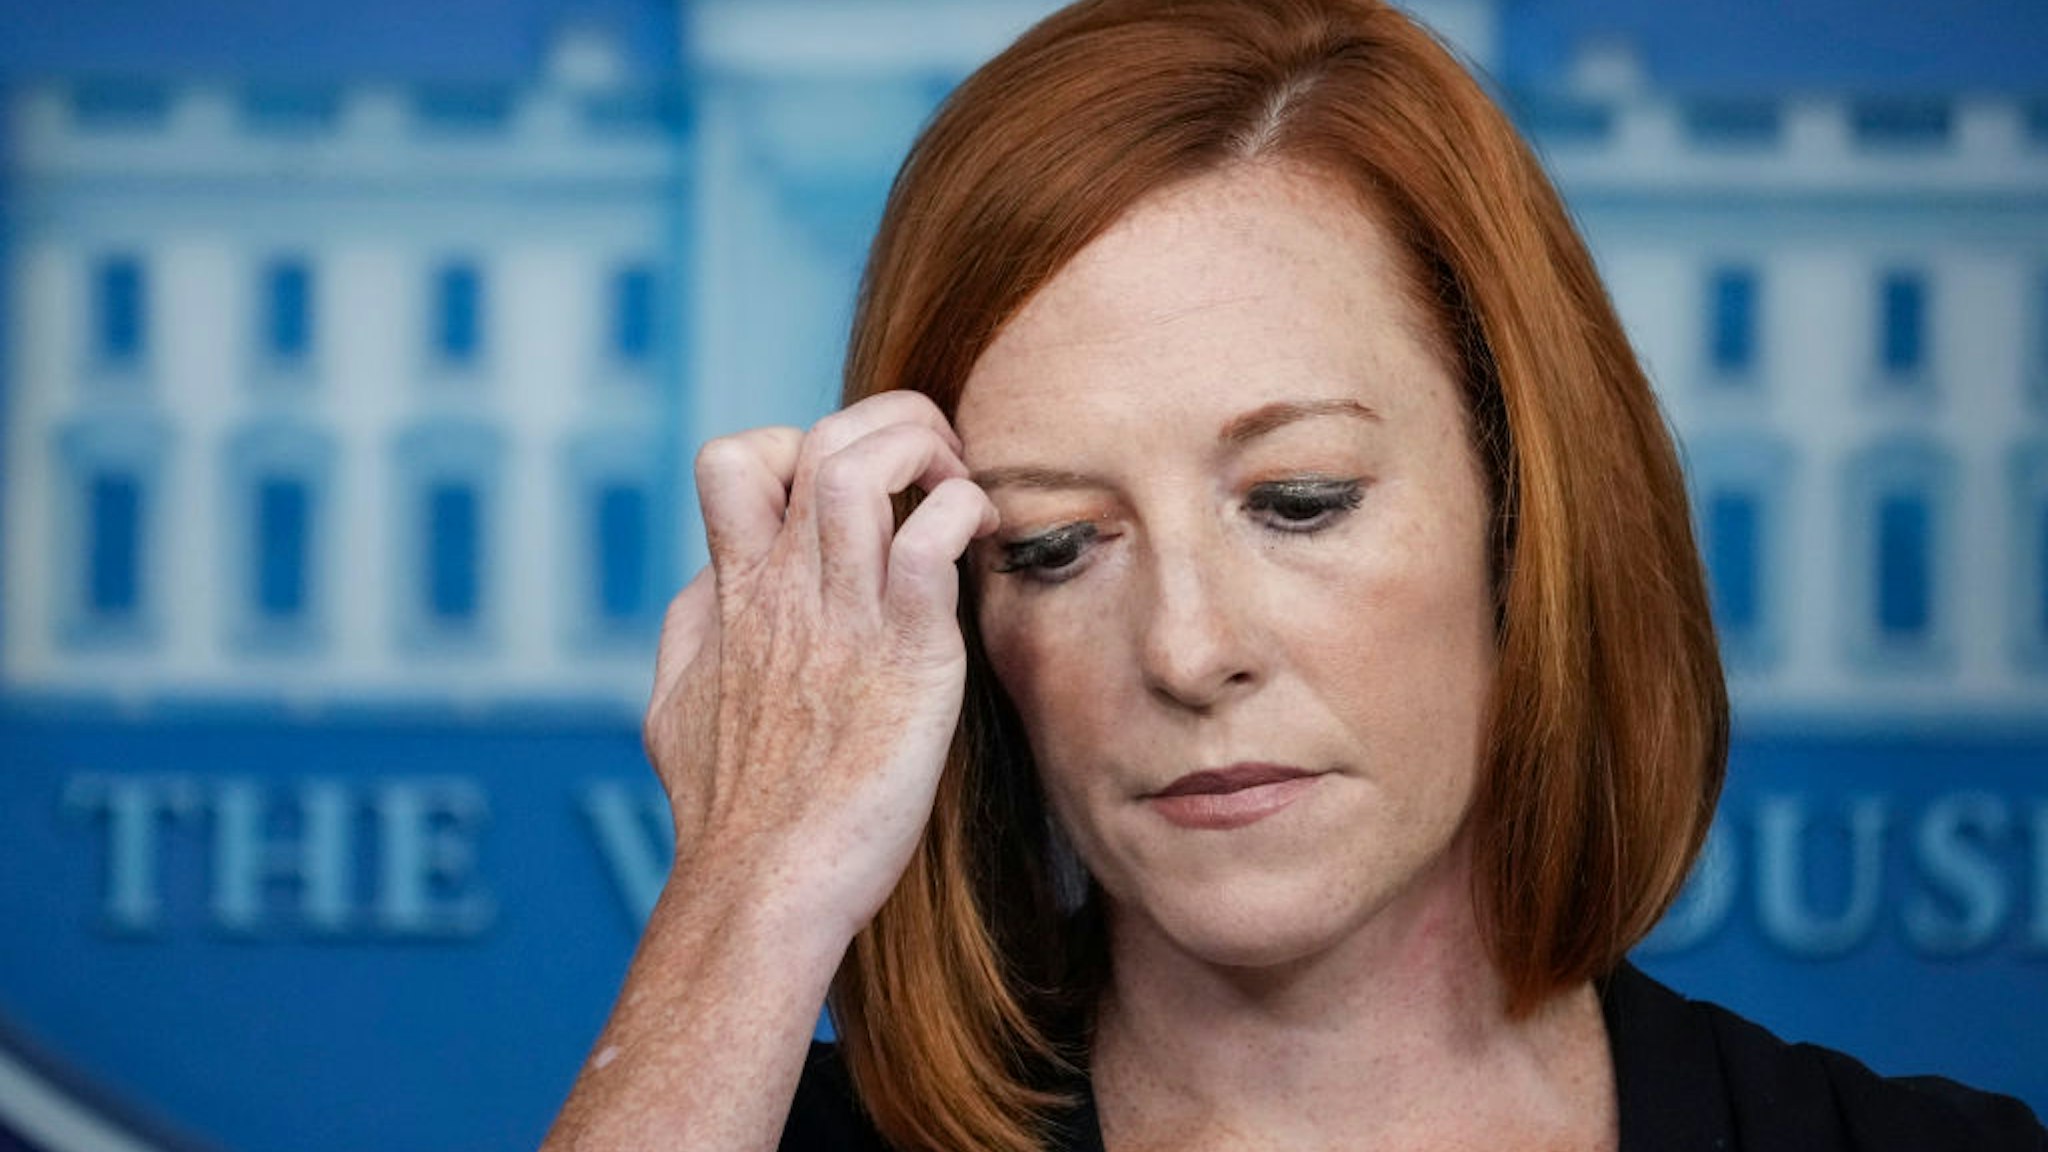 White House Press Secretary Jen Psaki speaks to reporters during the daily press briefing at the White House on August 27, 2021 in Washington, DC.